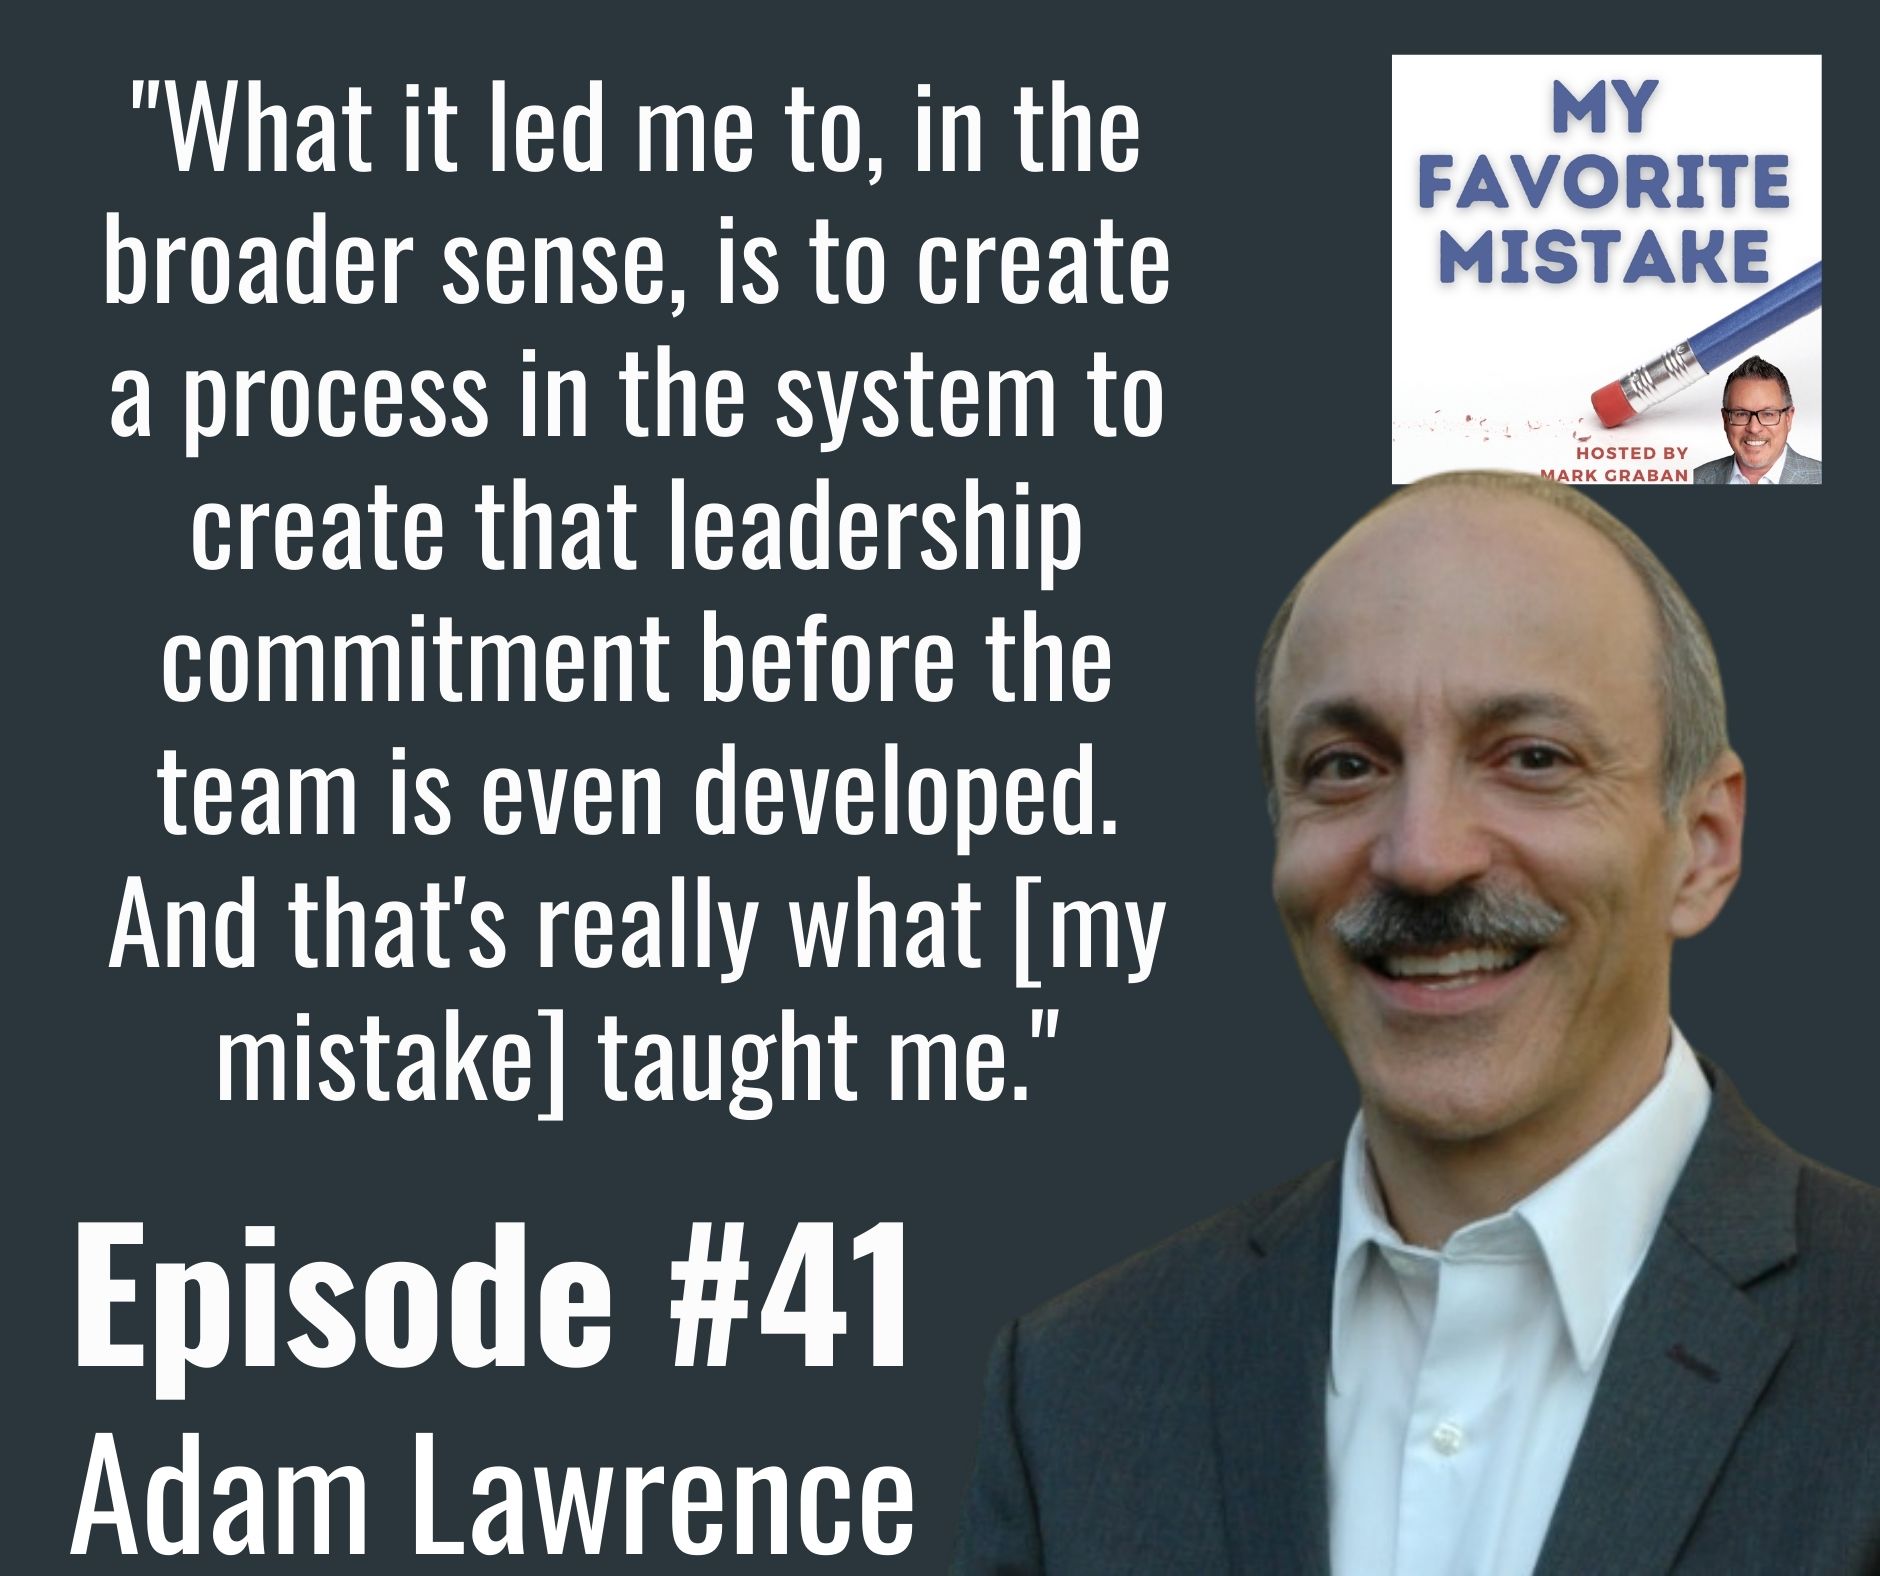 "What it led me to, in the broader sense, is to create a process in the system to create that leadership commitment before the team is even developed. And that's really what [my mistake] taught me."